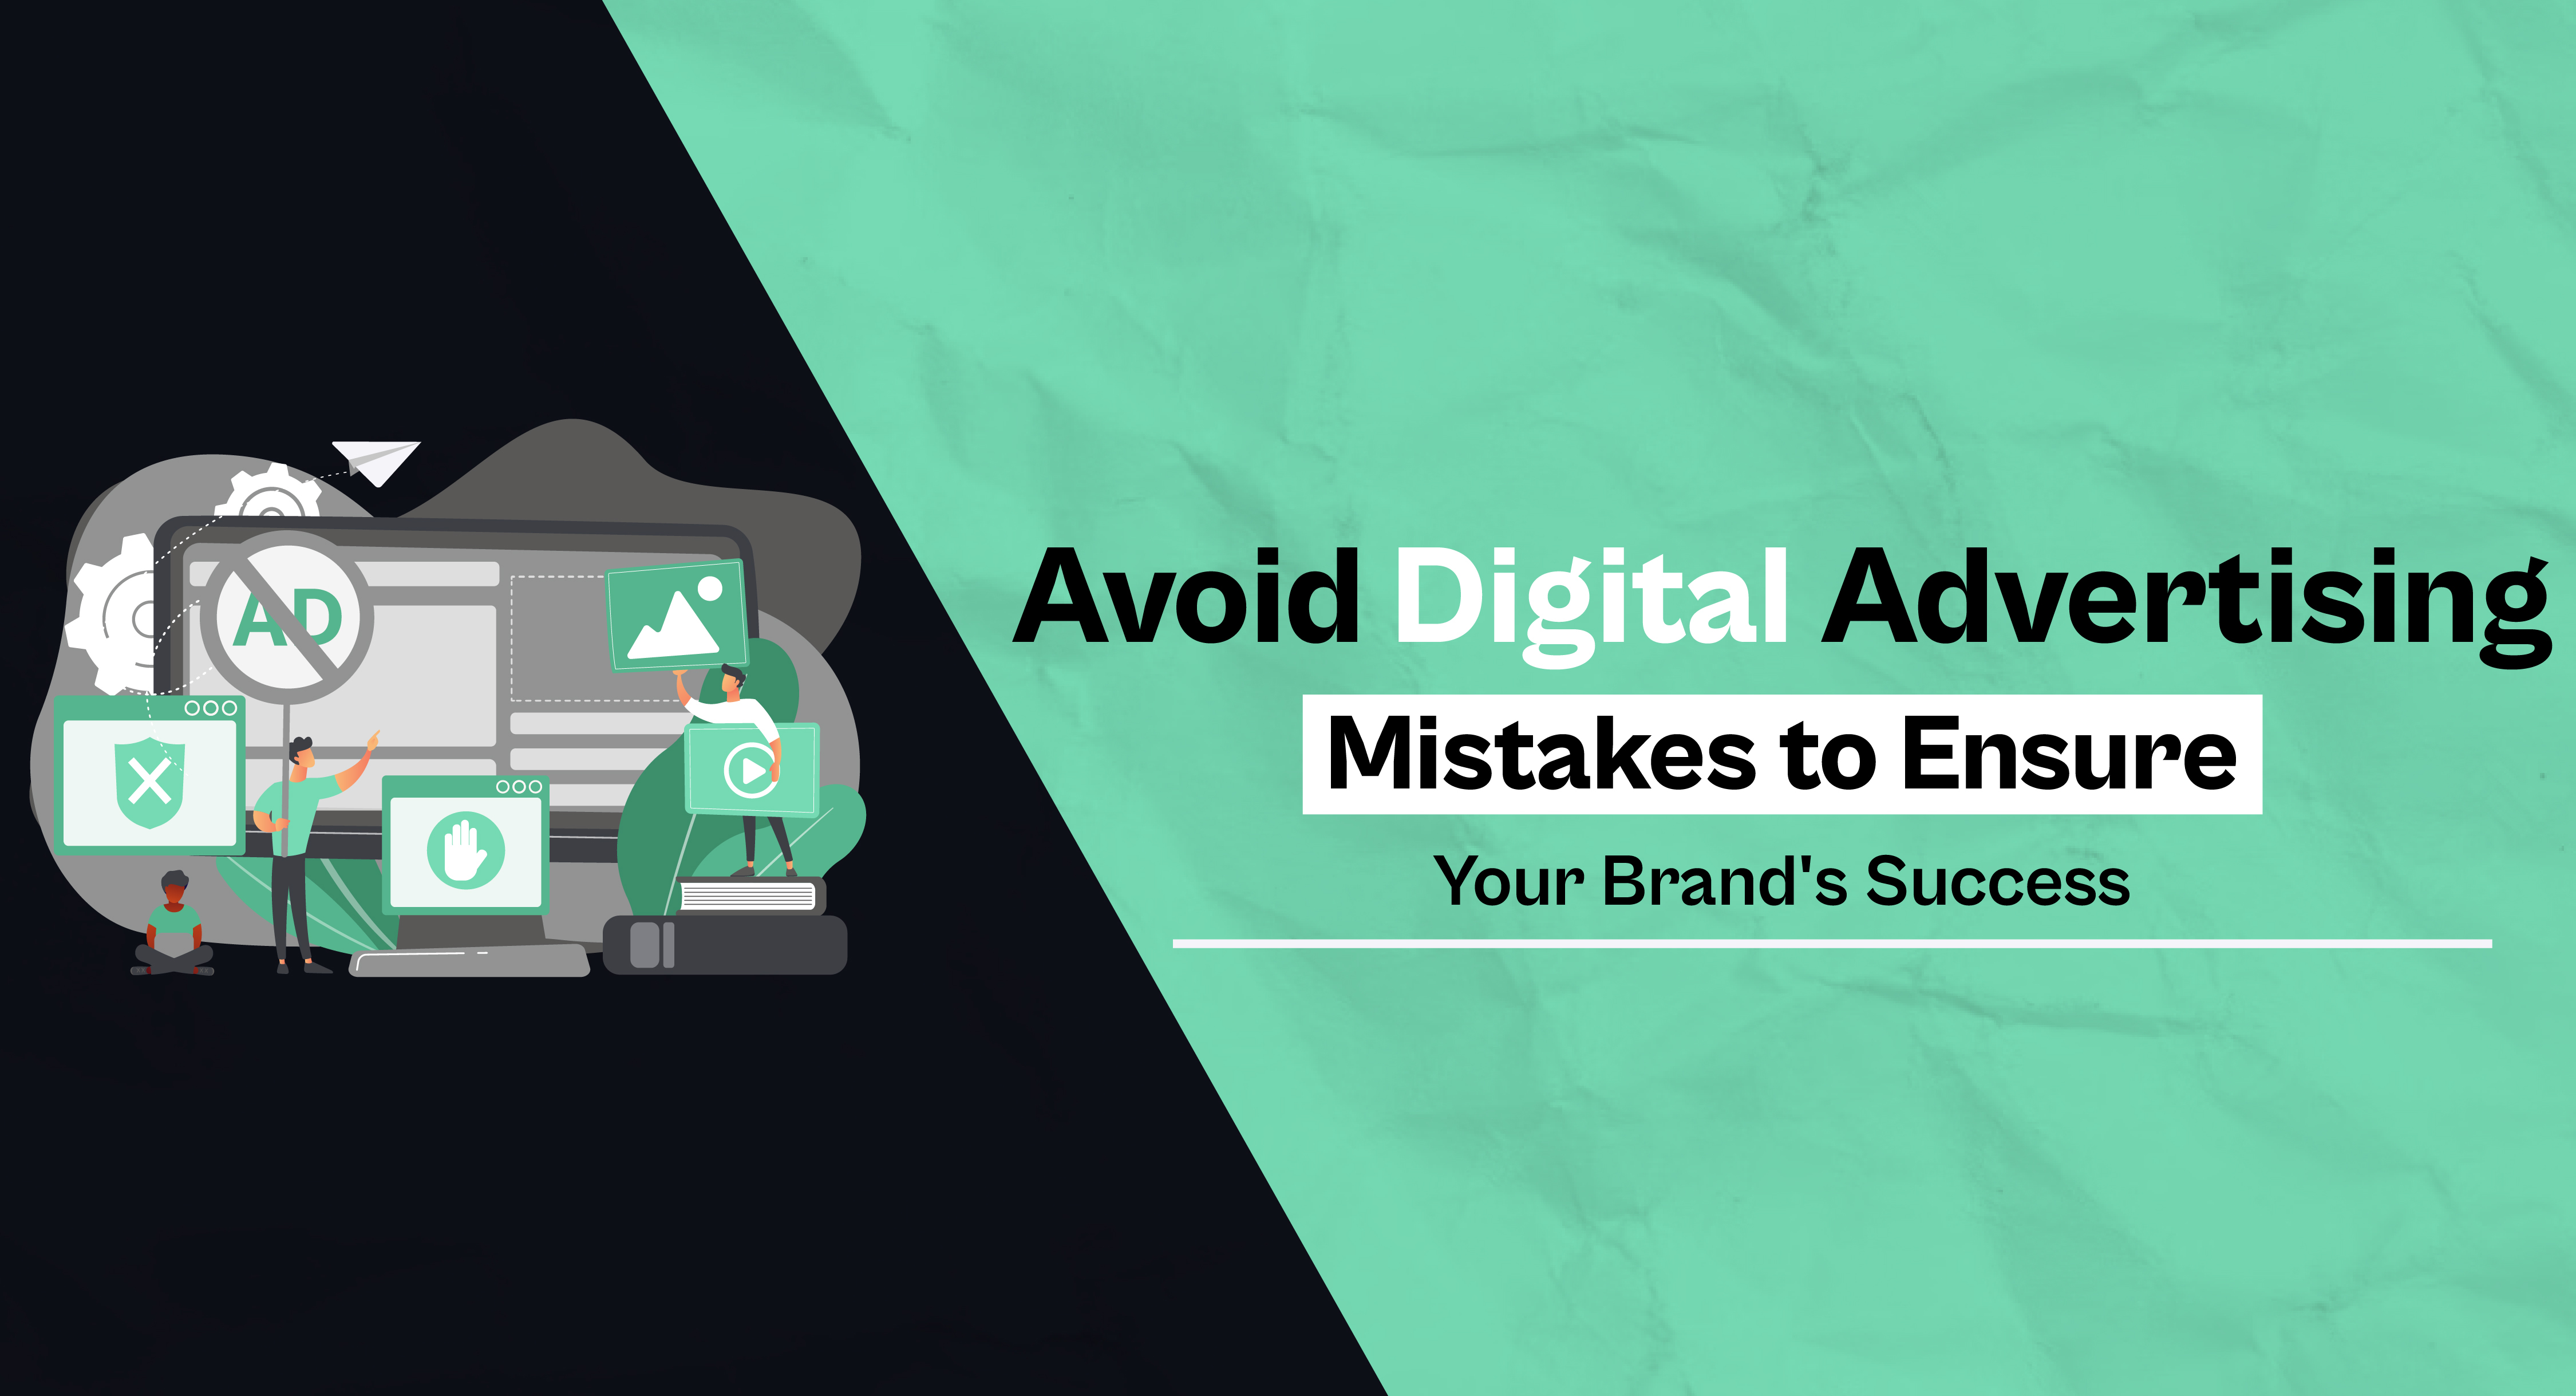 Avoid digital advertising mistakes to ensure your brand’s success